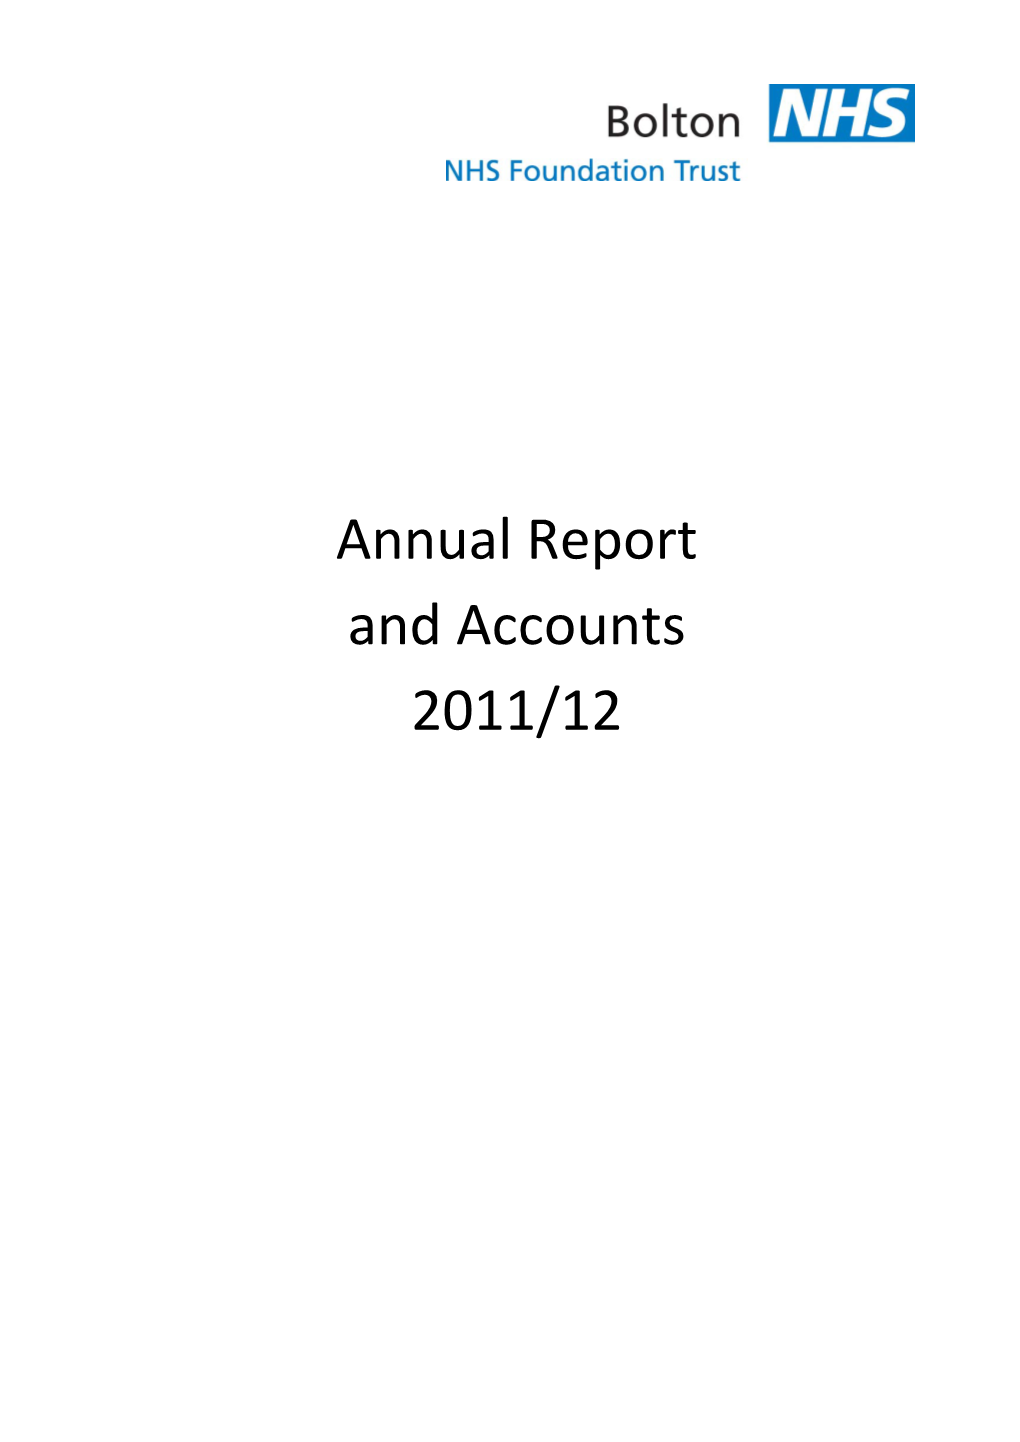 Annual Report and Accounts 2011/12